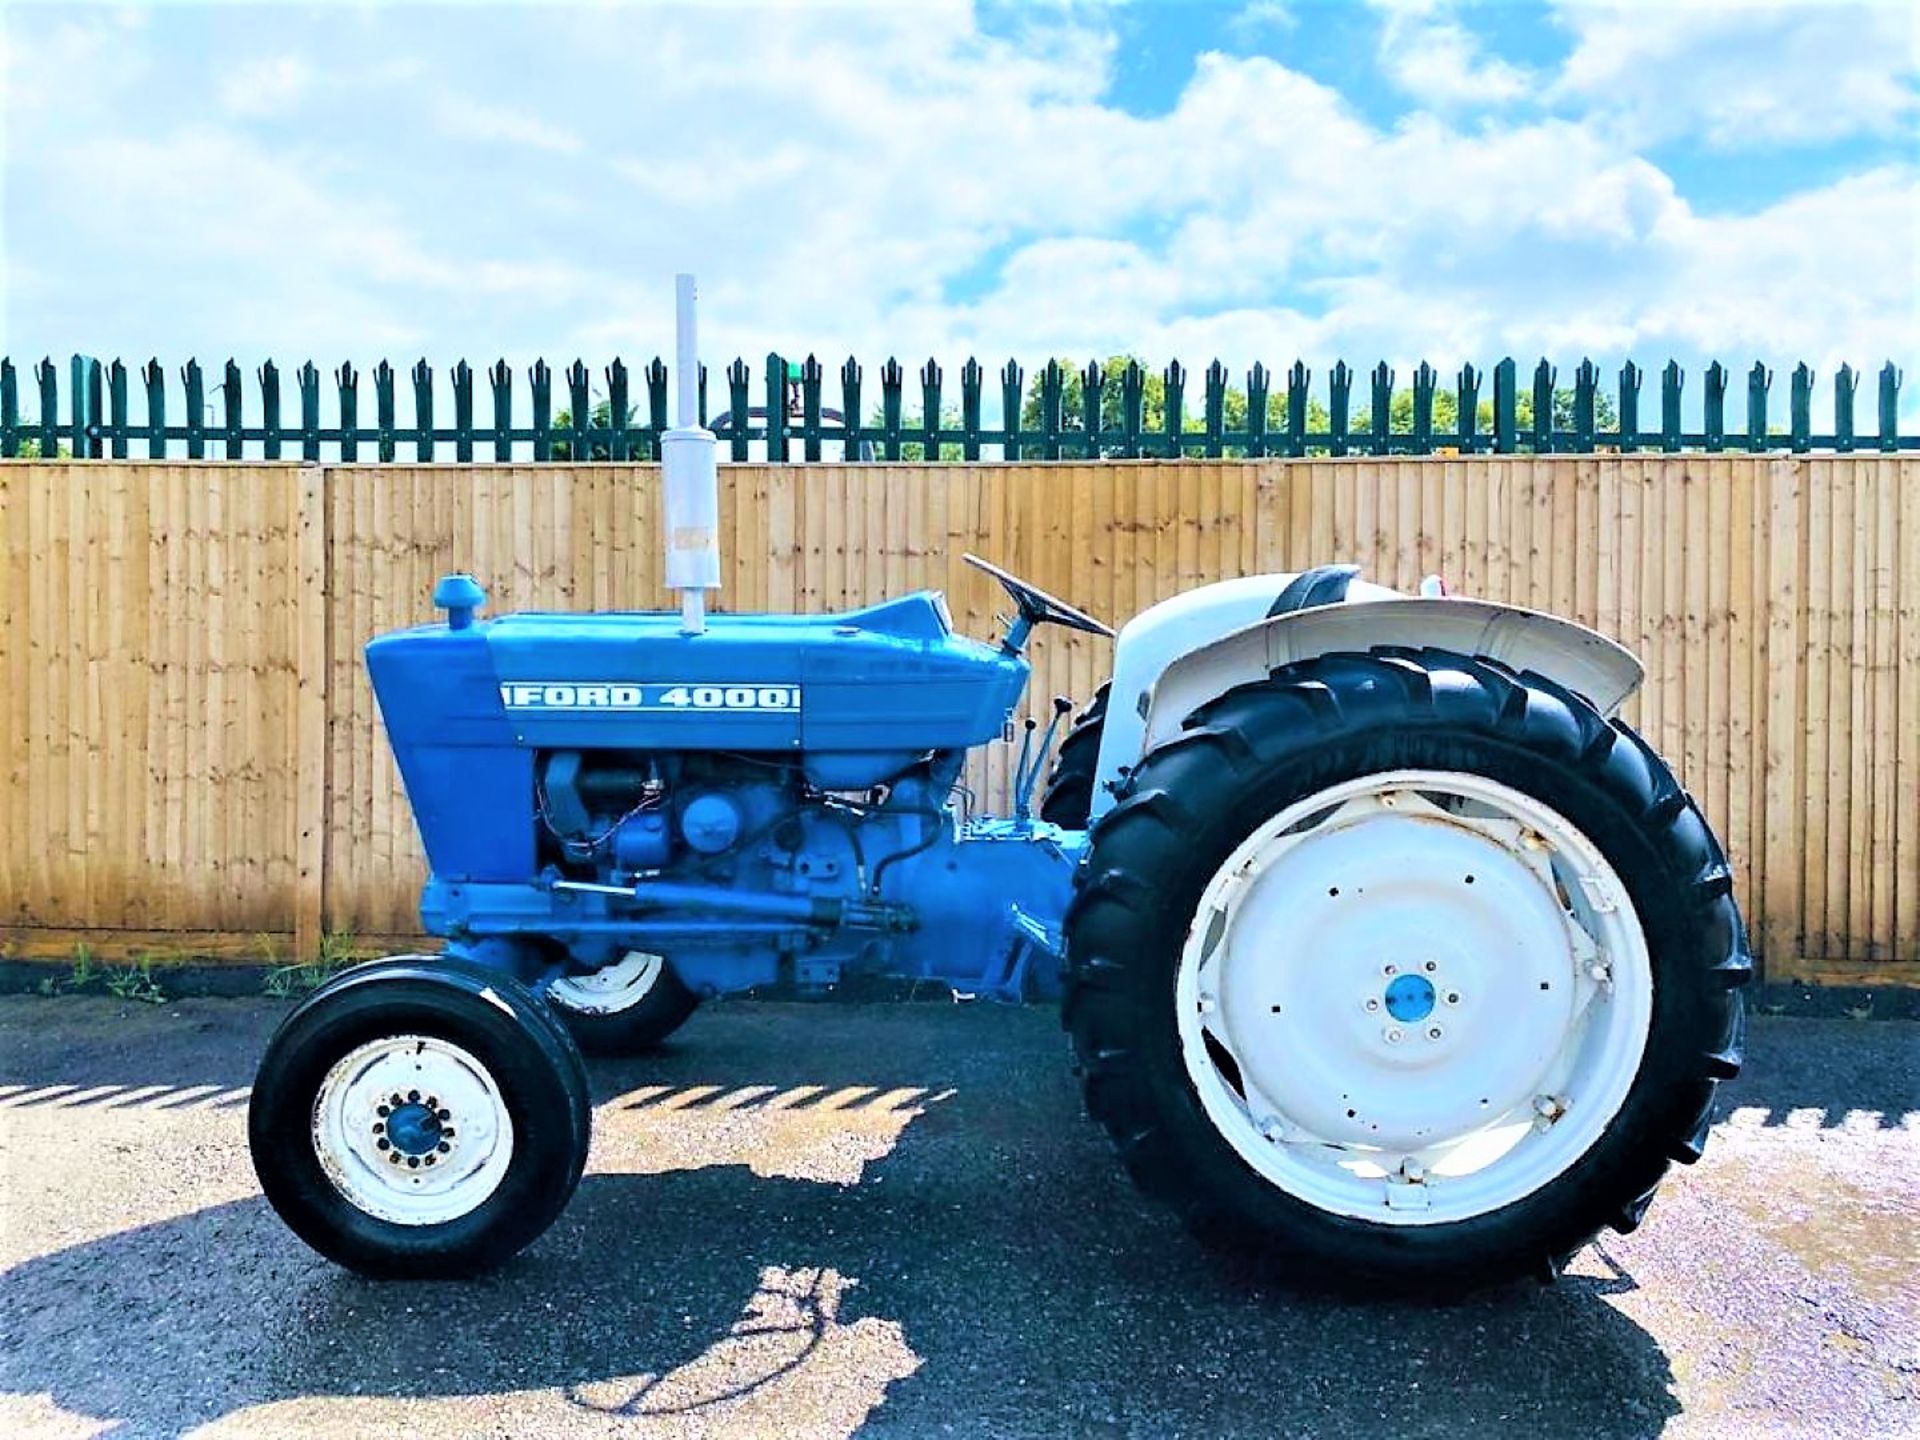 FORD 4000 TRACTOR YEAR 1969 8273 HOURS